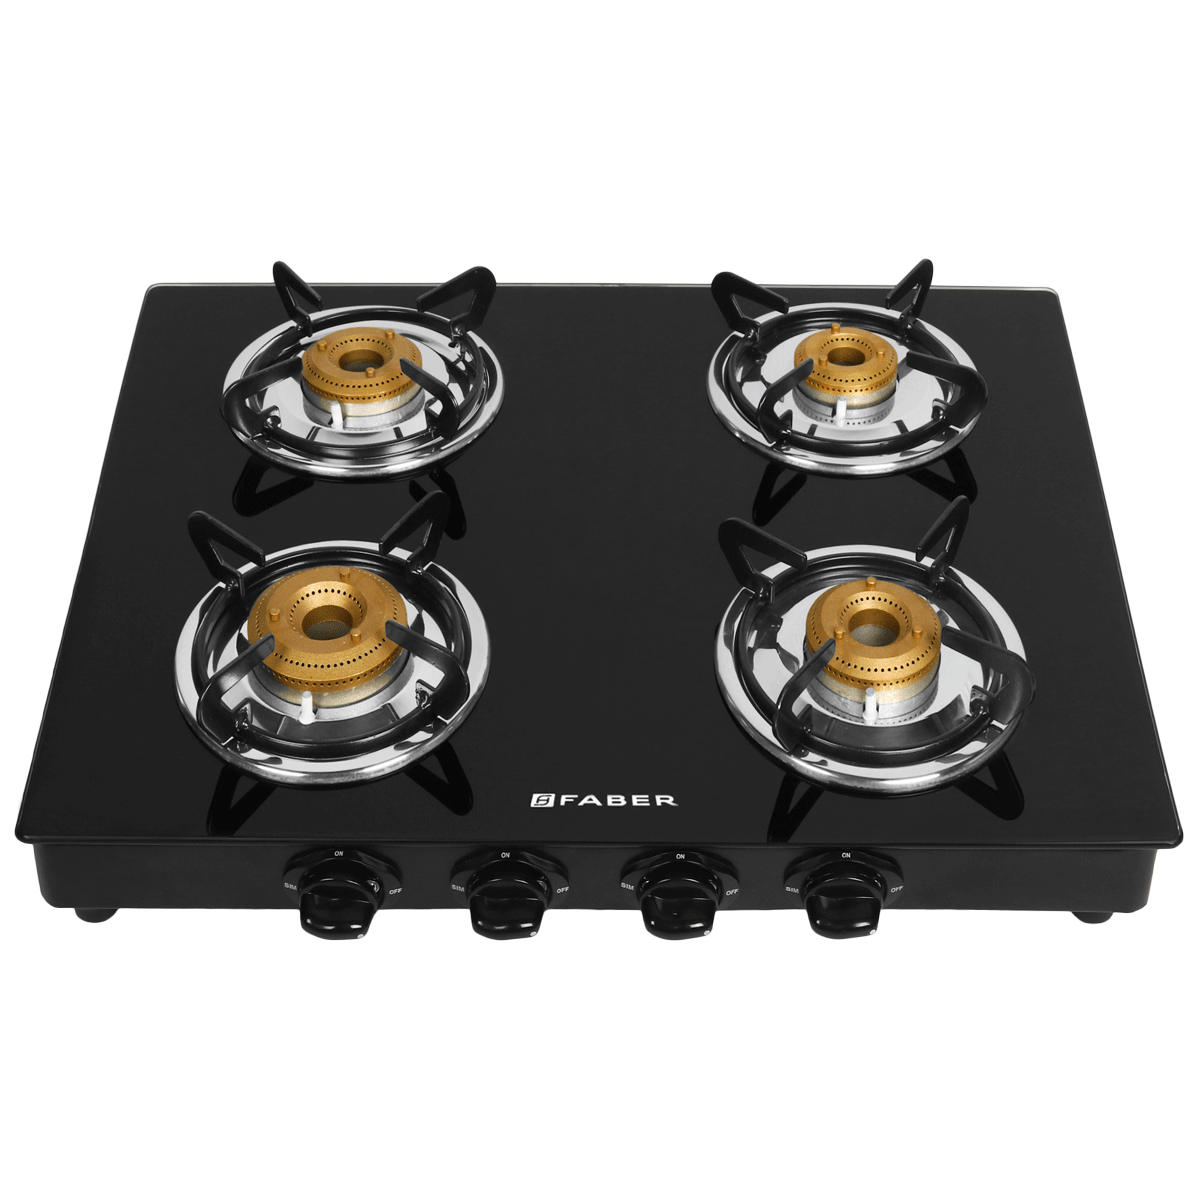 Faber Power 4BB 4 Burner Toughened Glass Gas Stove (Powder Coating Round Pan Support, 106.0629.733, Black)_4